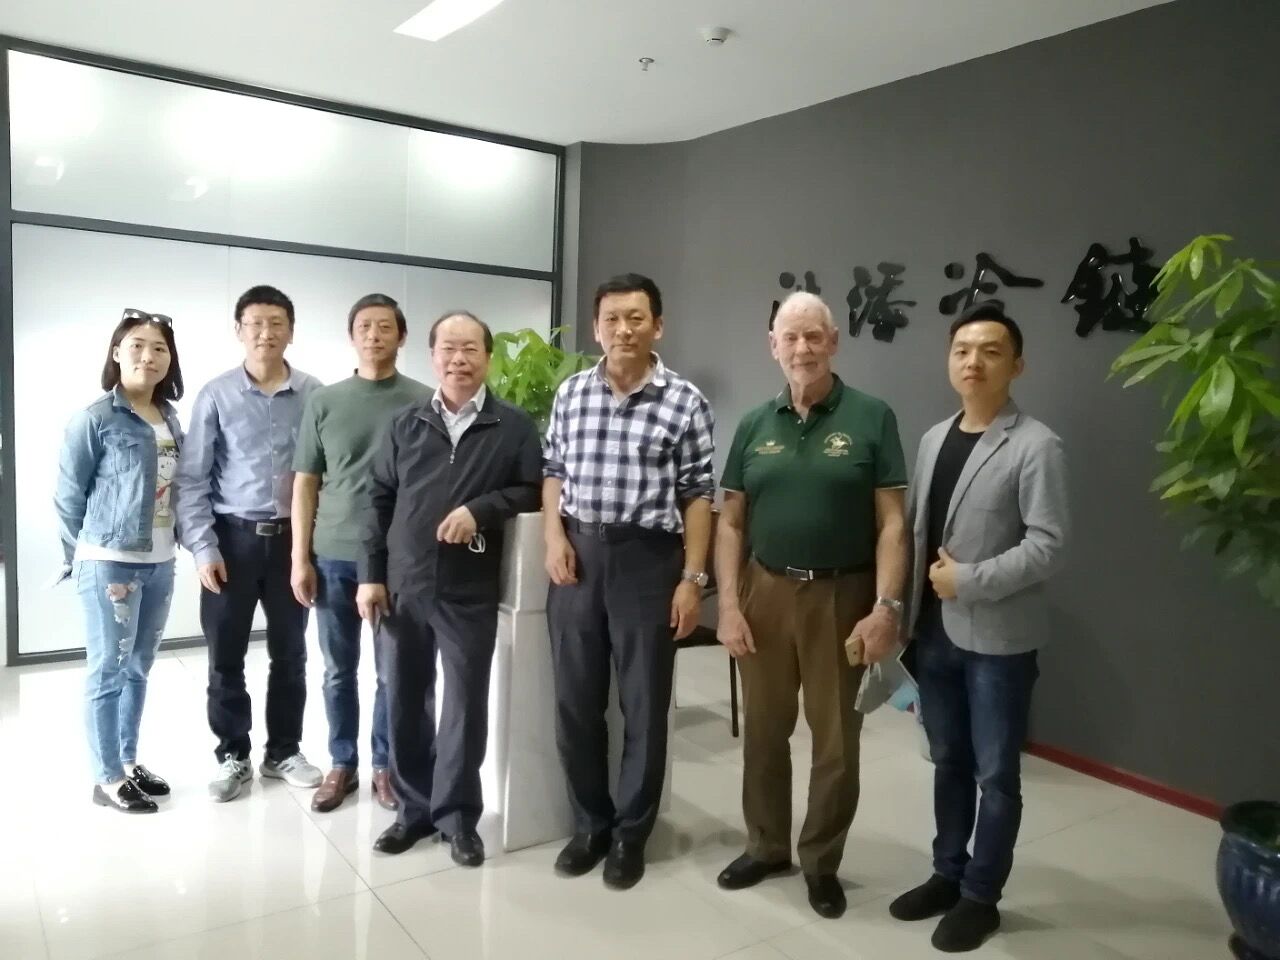 The chairman of Xiamen Chamber of Commerce led a team to our company for investigation